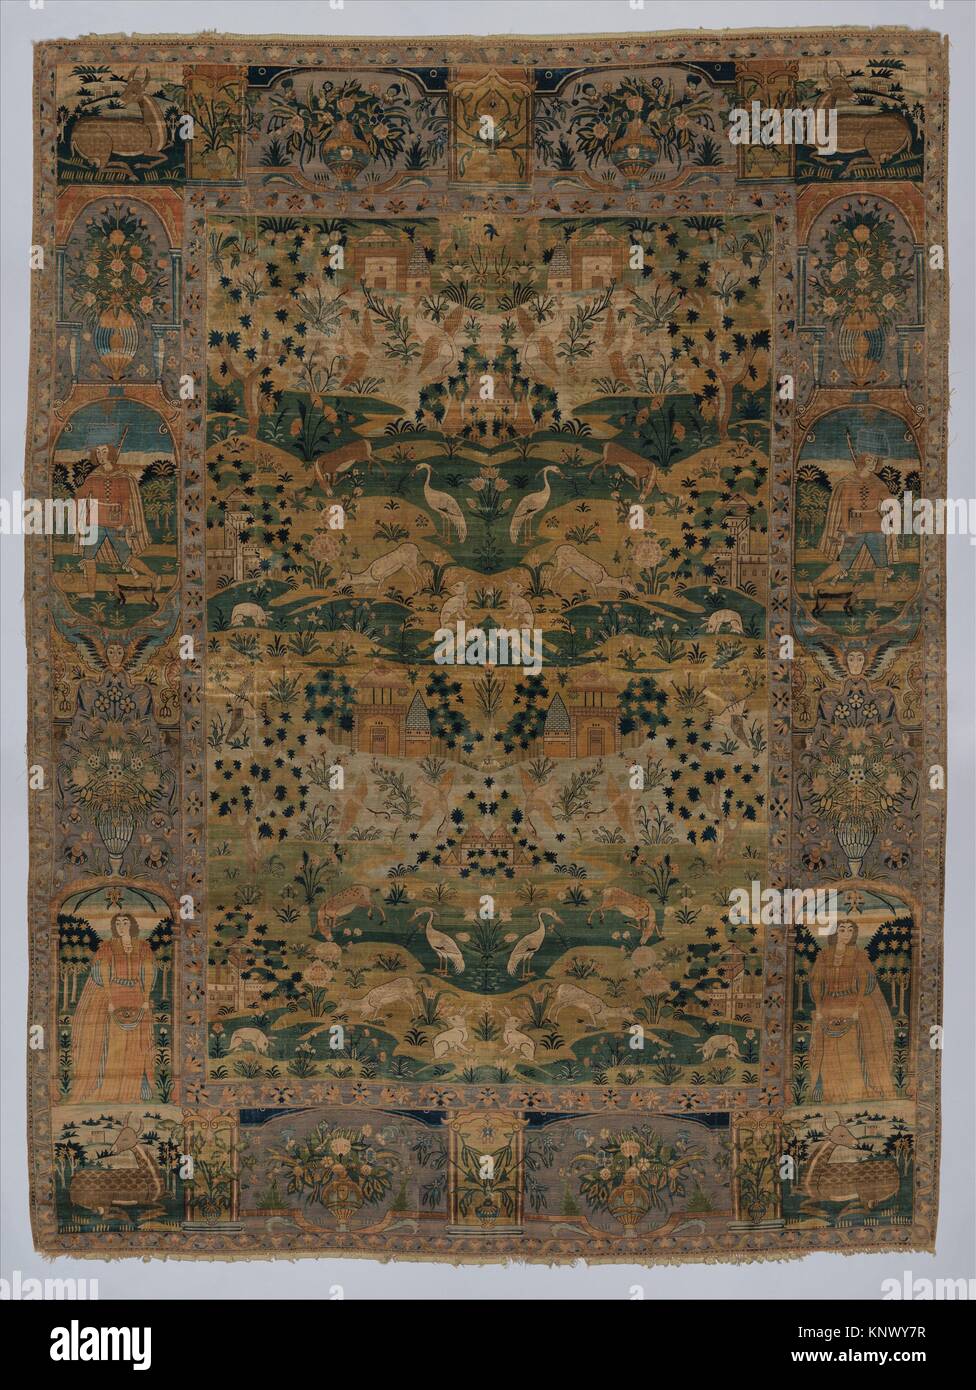 Pictorial Carpet. Object Name: Carpet; Date: 17th century; Geography: Made in Iran; Medium: Silk (warp, weft, and pile), metal wrapped thread; Stock Photo